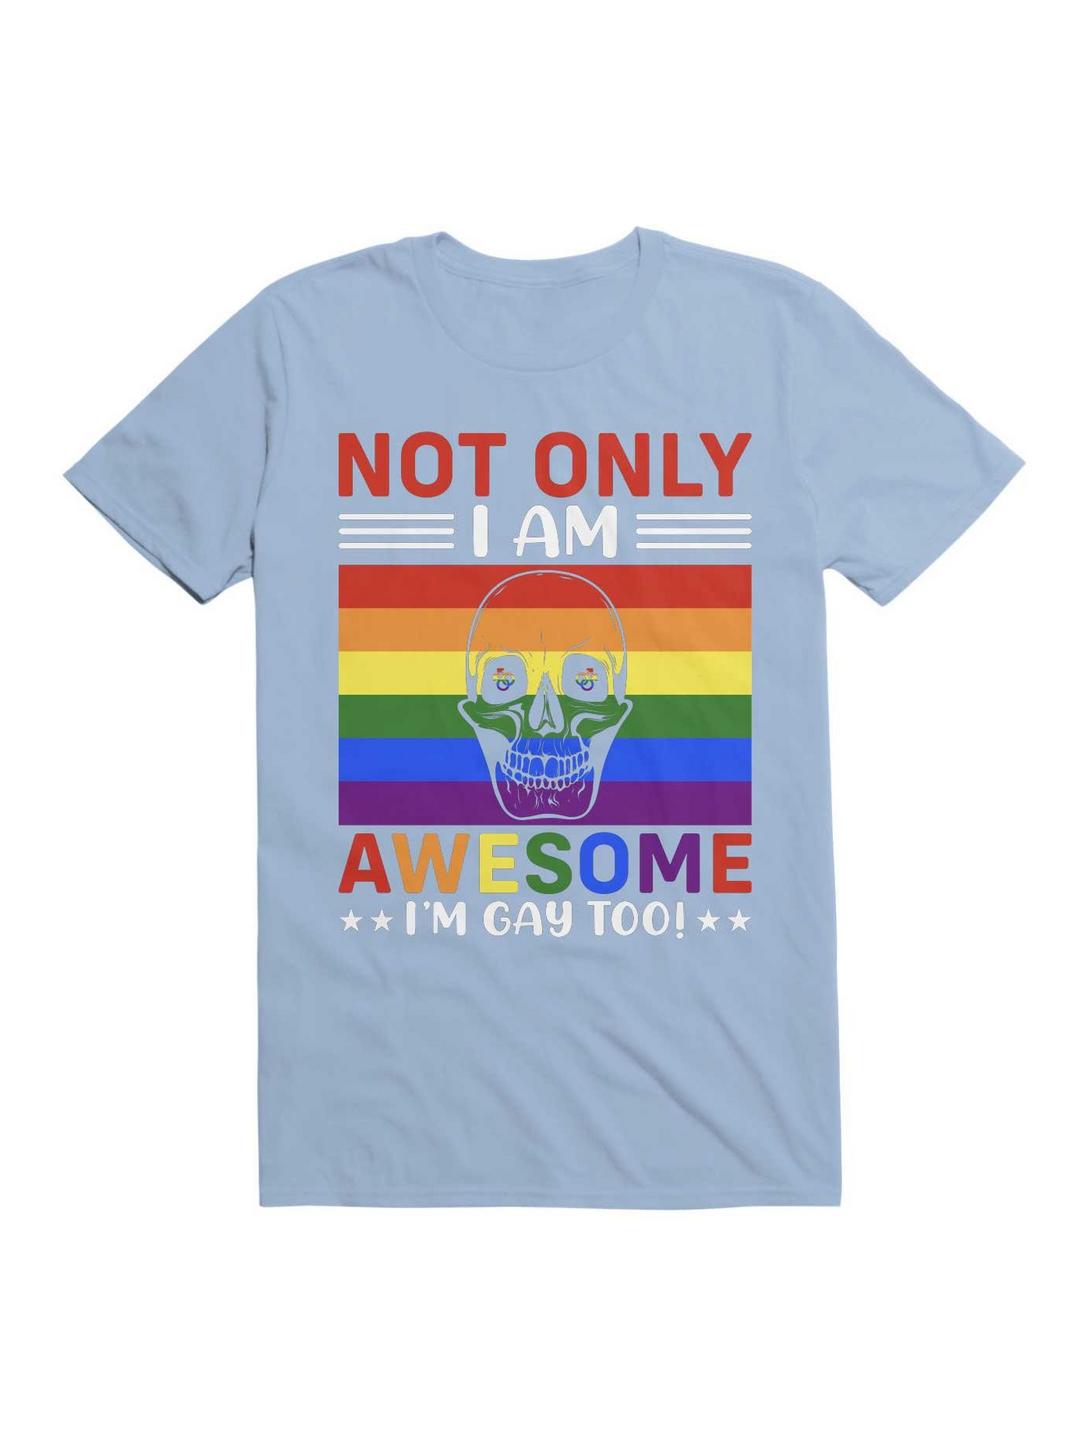 Not Only I'm Gay I Am Awesome Too! T-Shirt, LIGHT BLUE, hi-res